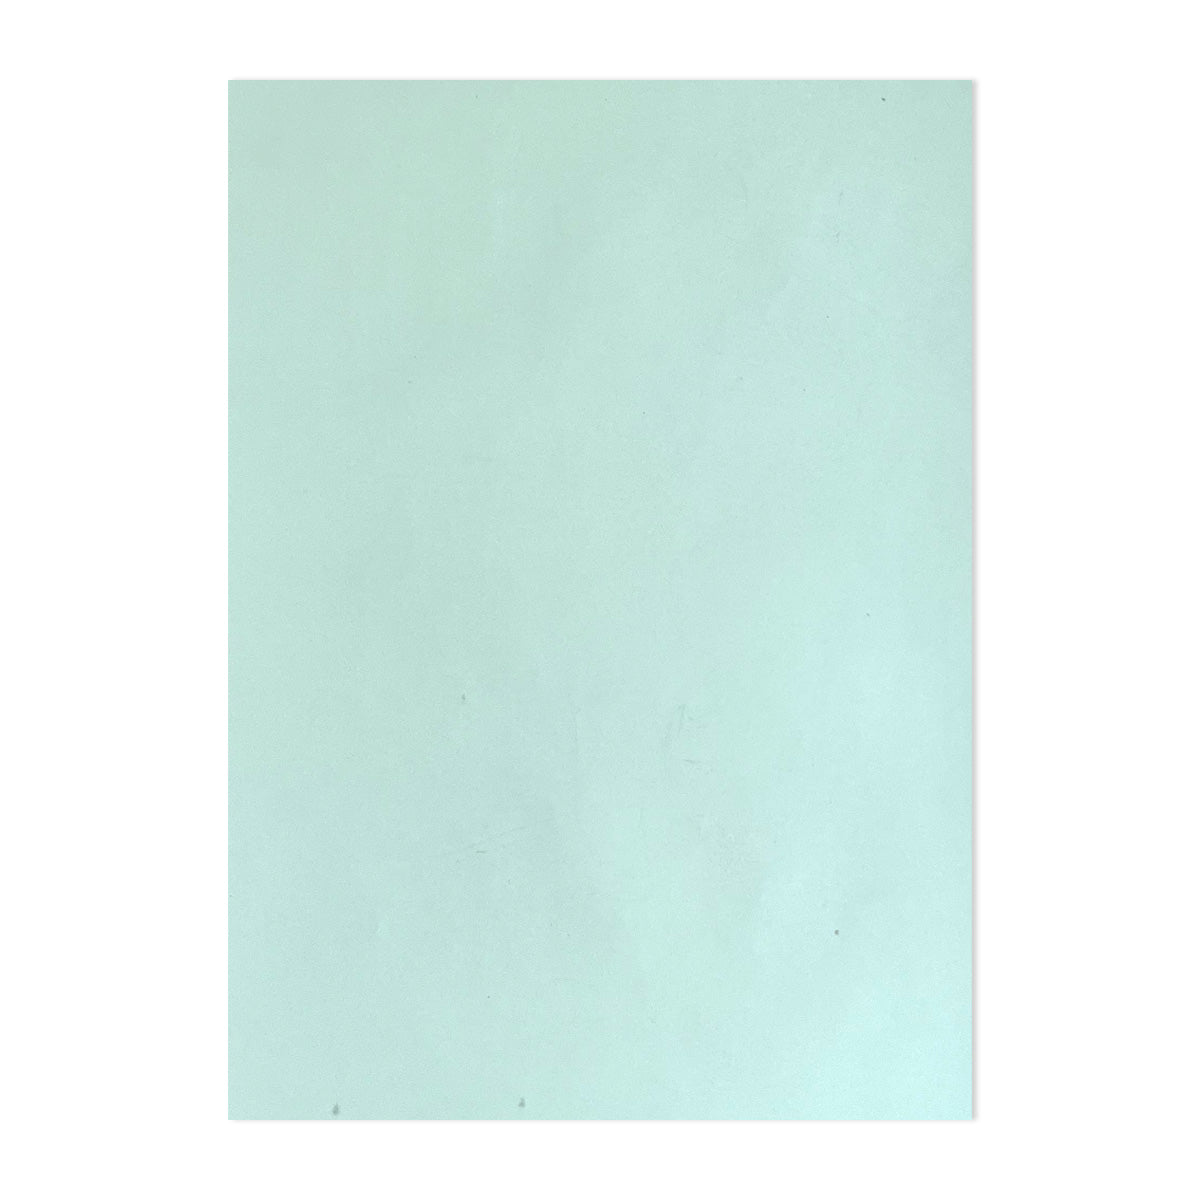 Cromatica® Blue Translucent Paper 25x38 in. 250 Sheets